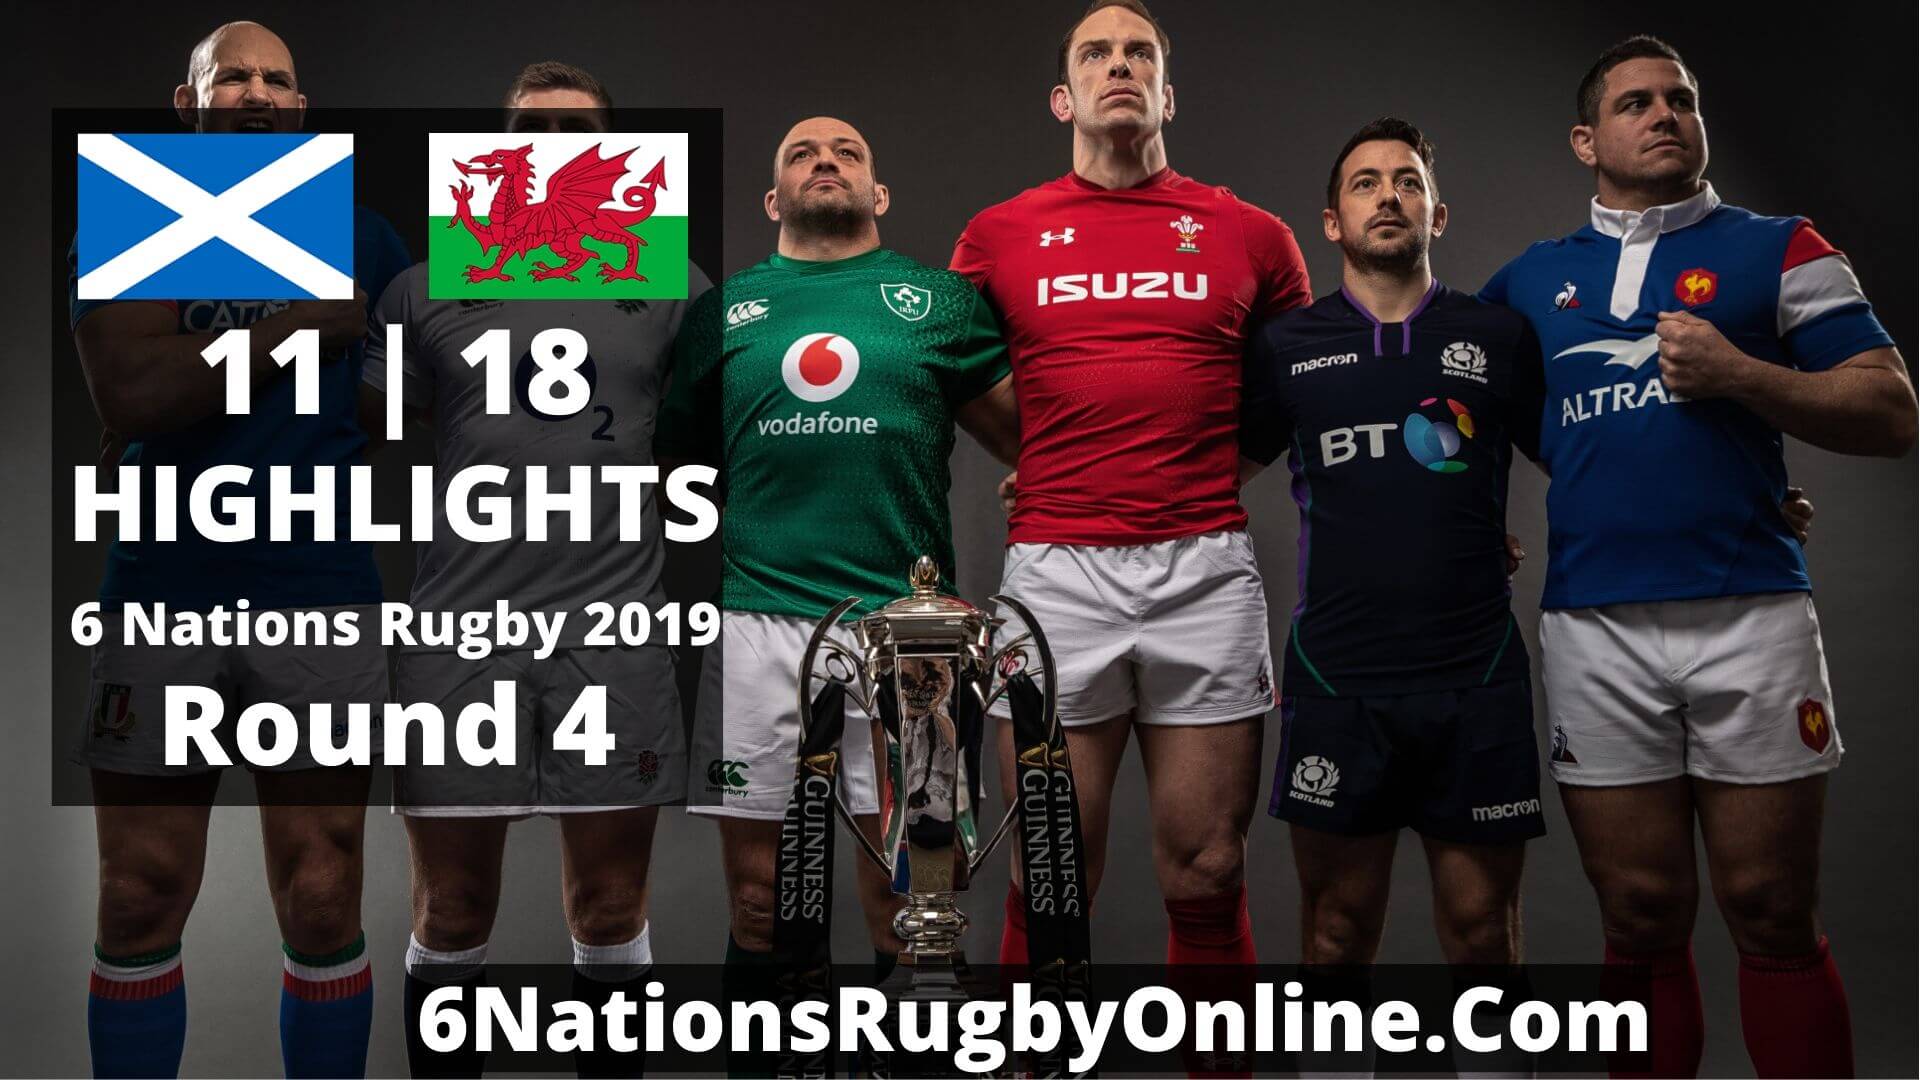 Scotland Vs Wales Highlights 2019 Six Nations Rugby Round 4